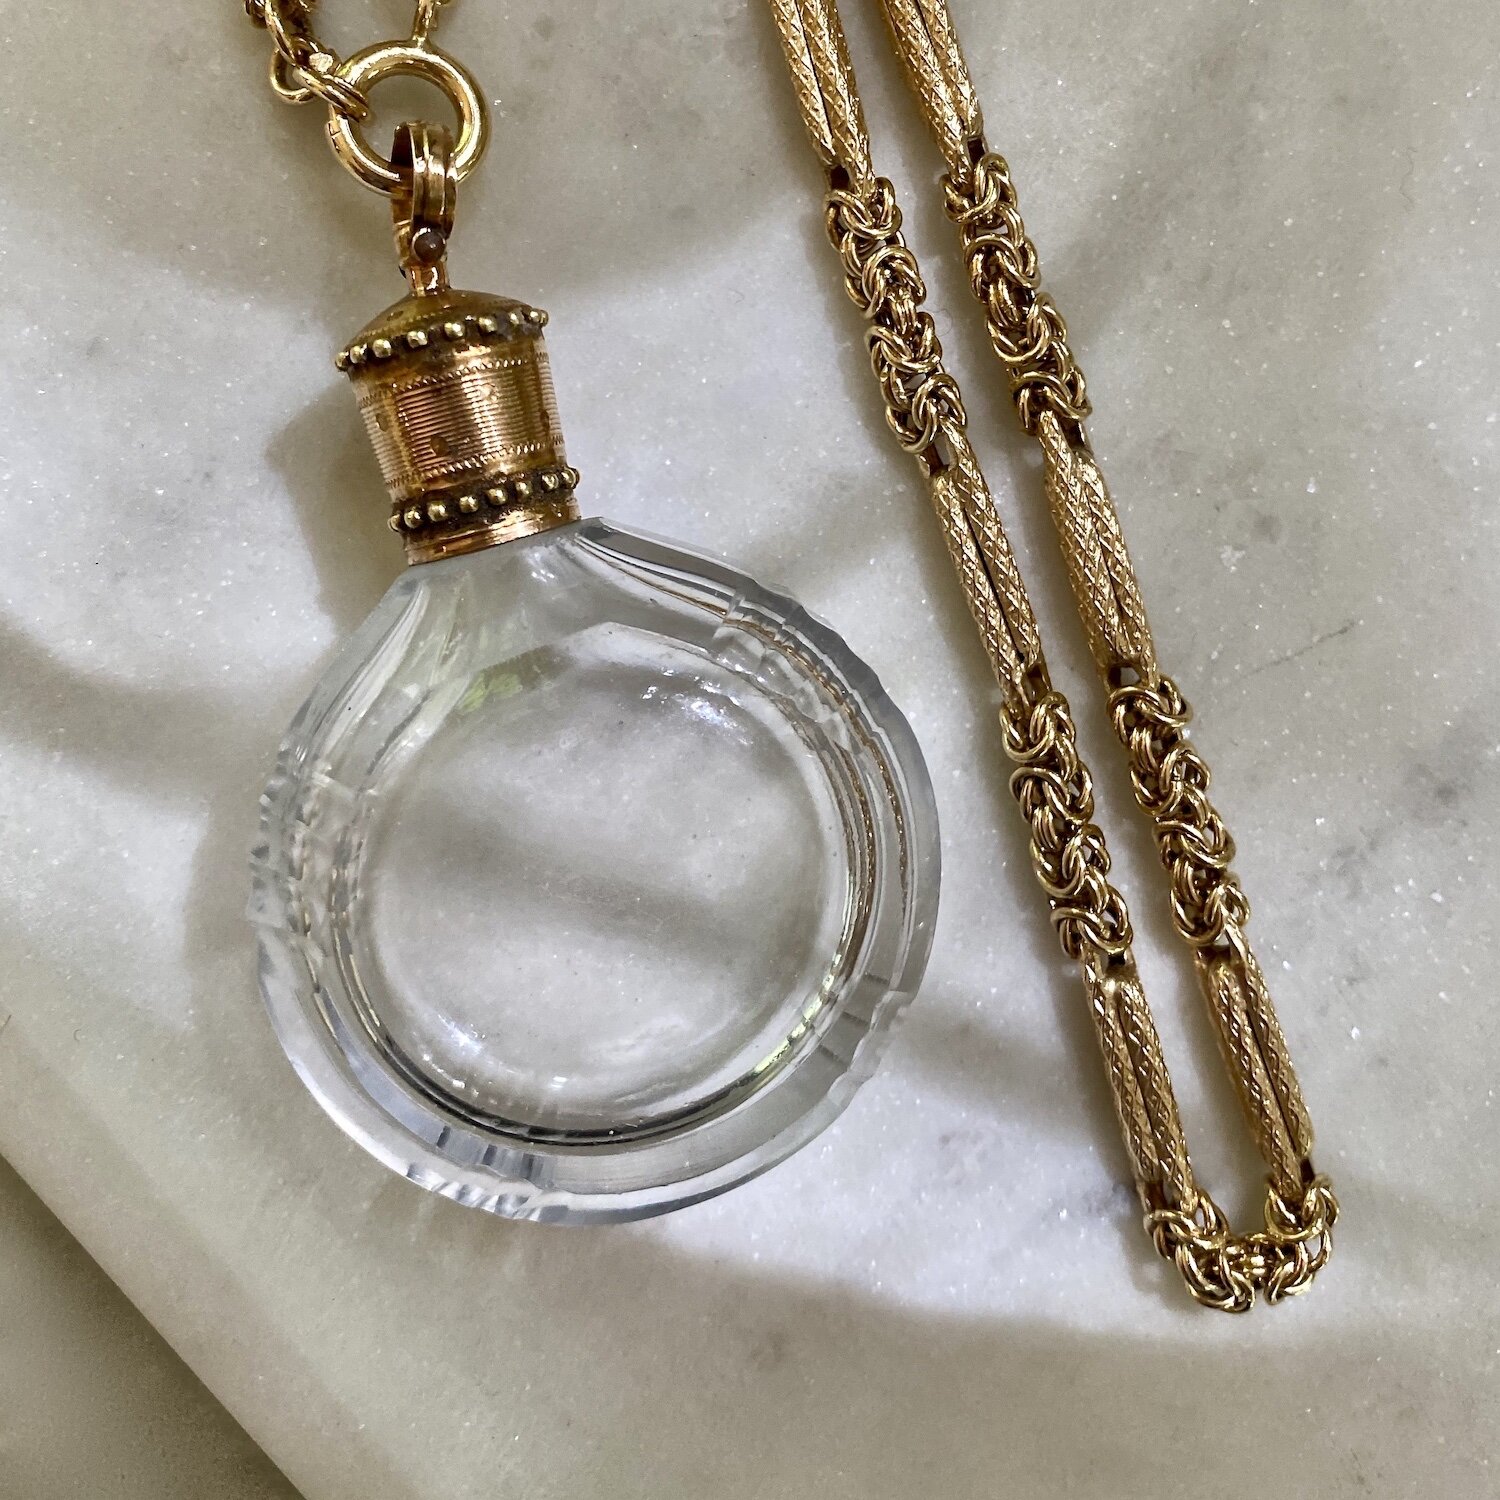 Antique Late 18th Century Scent Bottle Pendant — Luck and Lockets